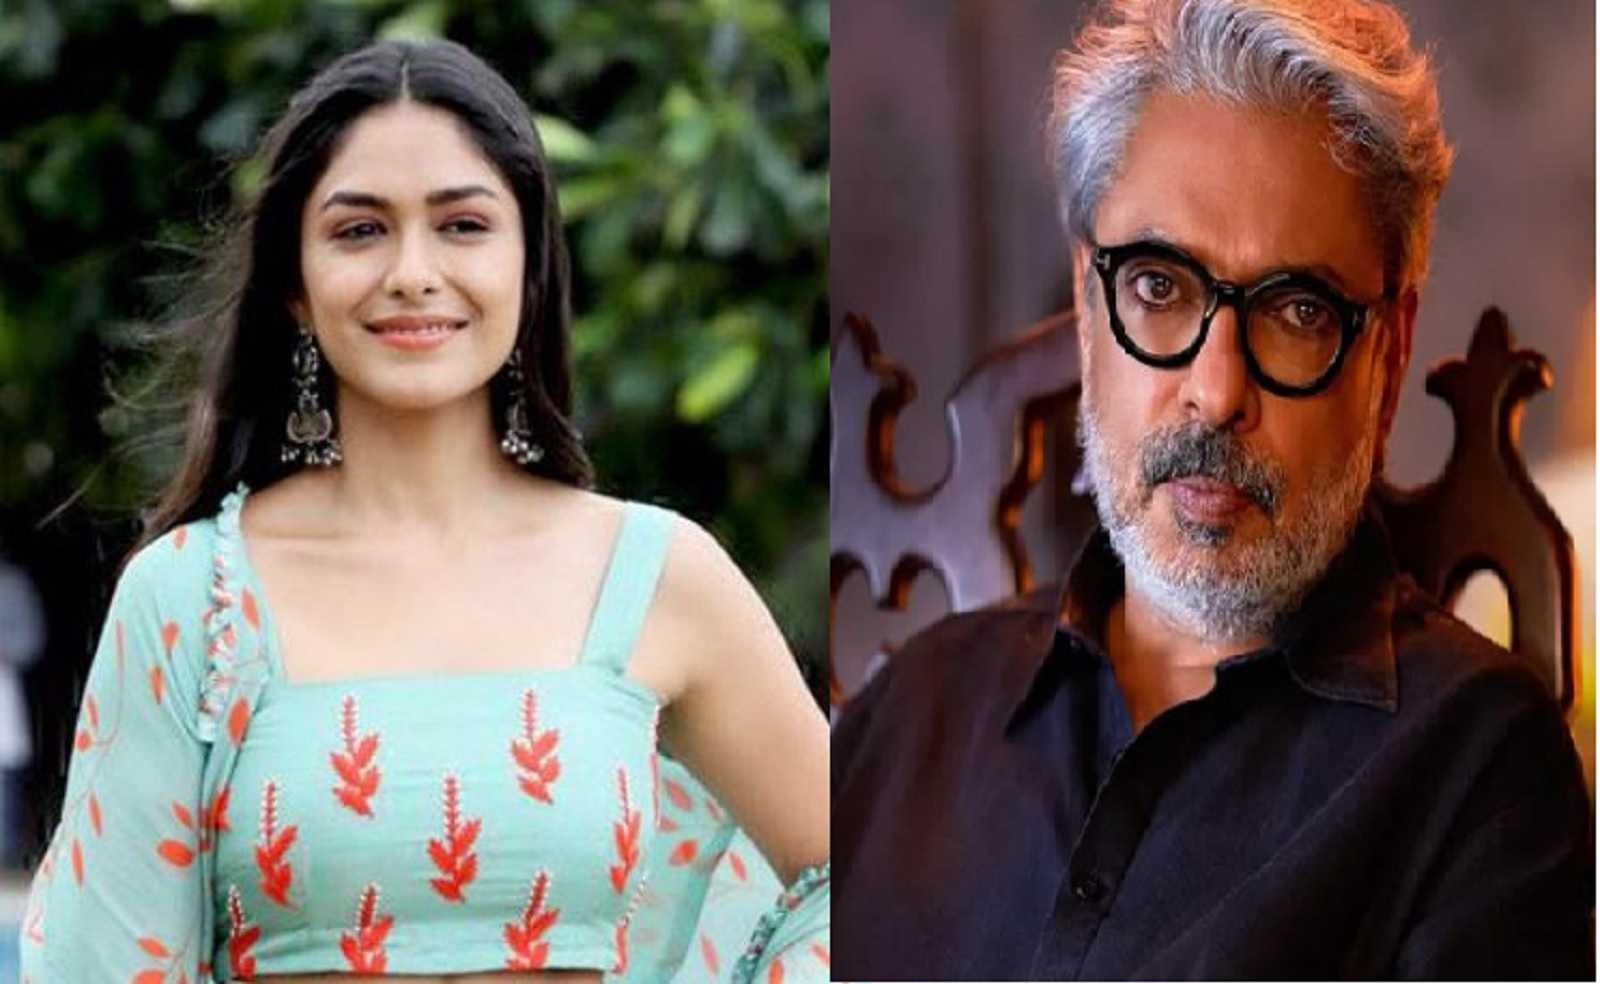 Is there any new project coming? Mrunal Thakur gets clicked outside filmmaker Sanjay Leela Bhansali's office